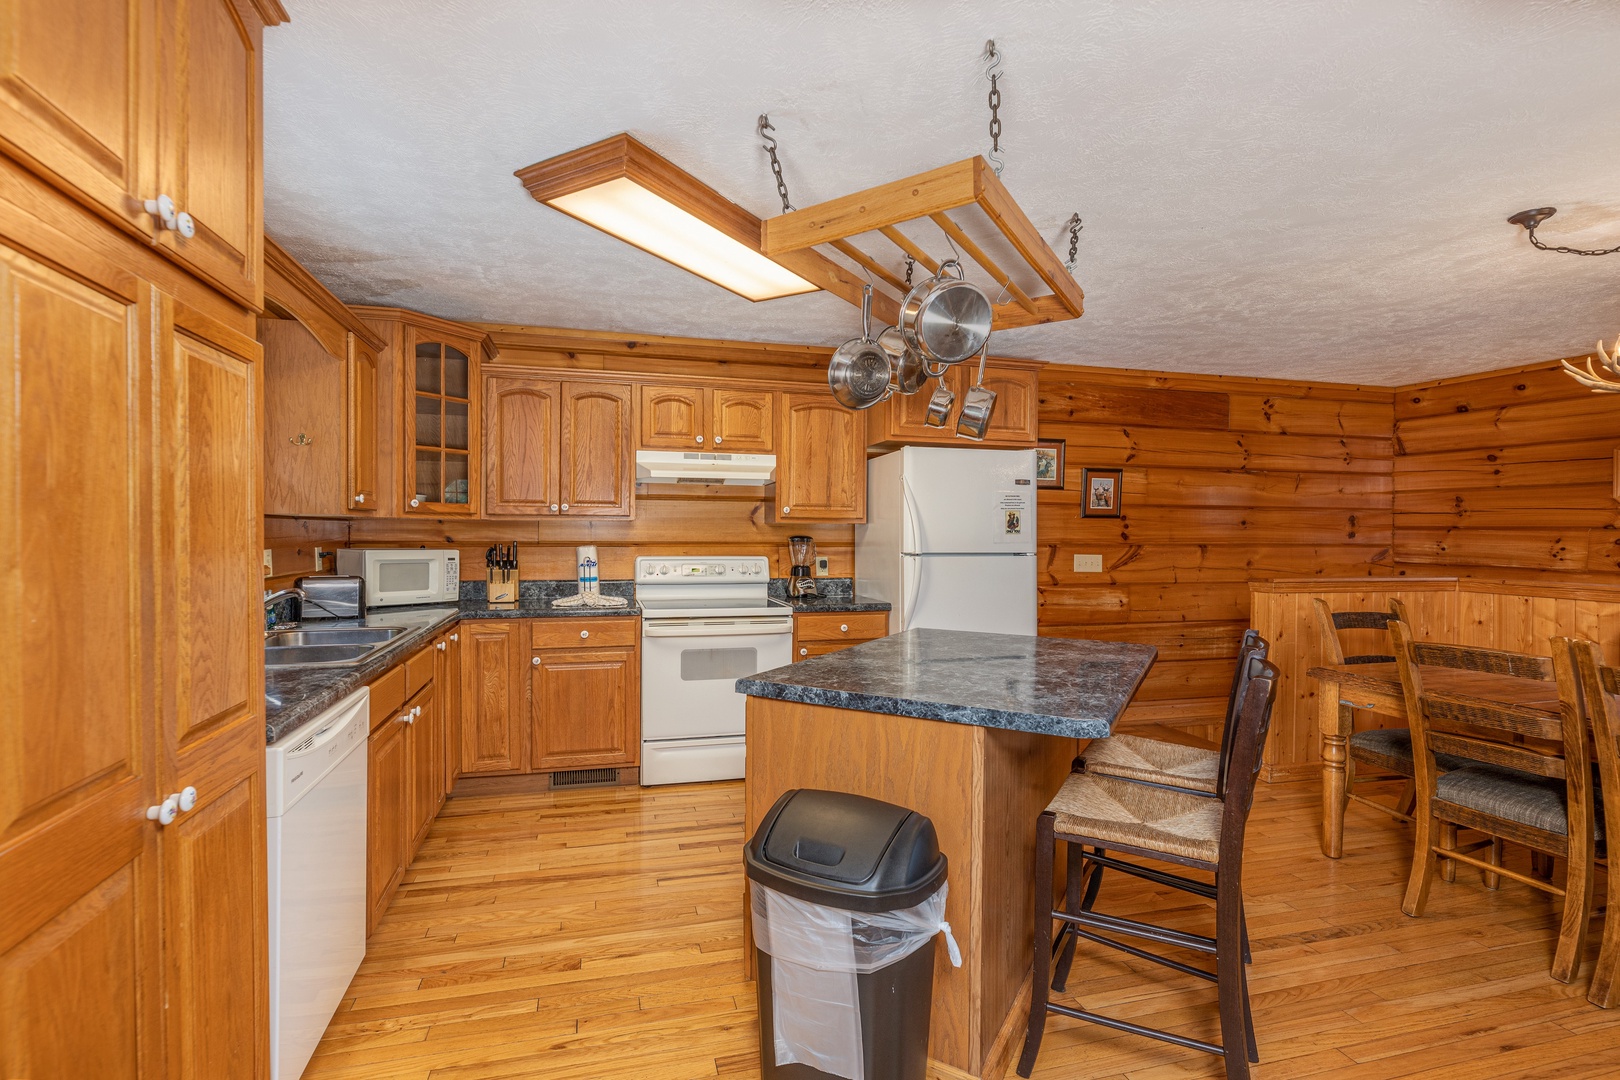 Kitchen with white appliances and a breakfast bar at Wildlife Retreat, a 3 bedroom cabin rental located in Pigeon Forge